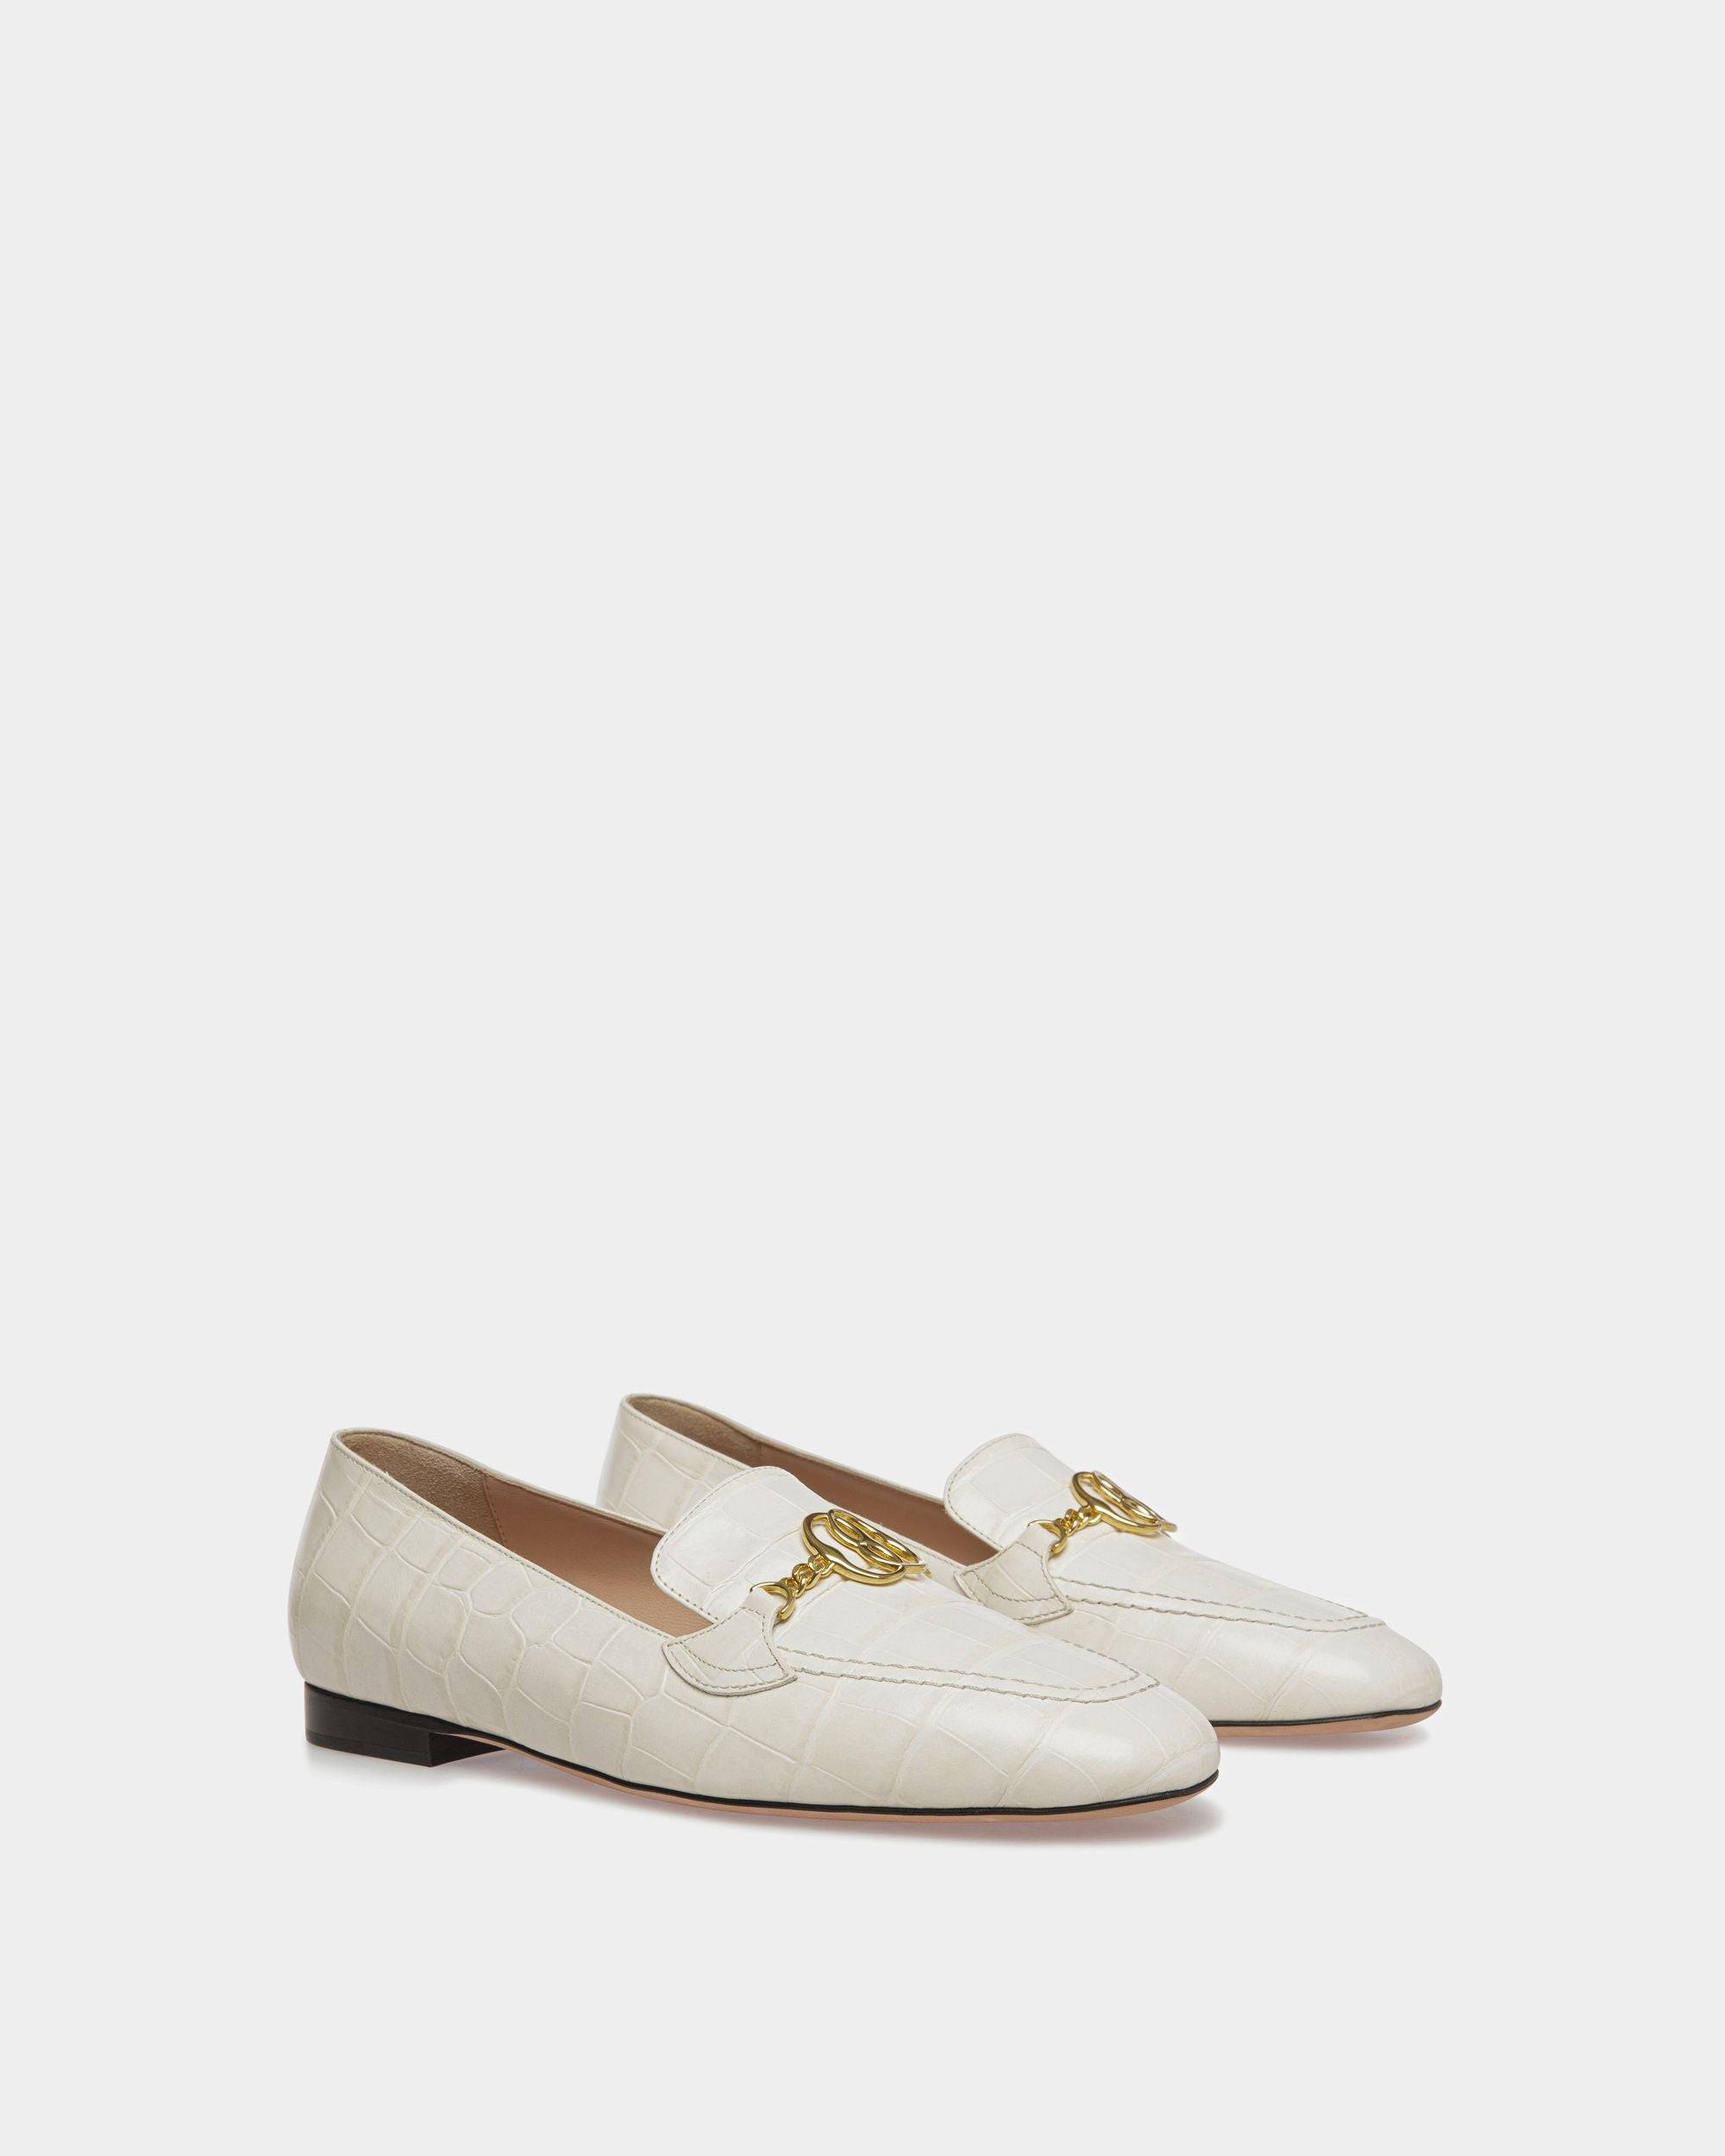 Obrien | Women's Loafers | Bone Leather | Bally | Still Life 3/4 Front